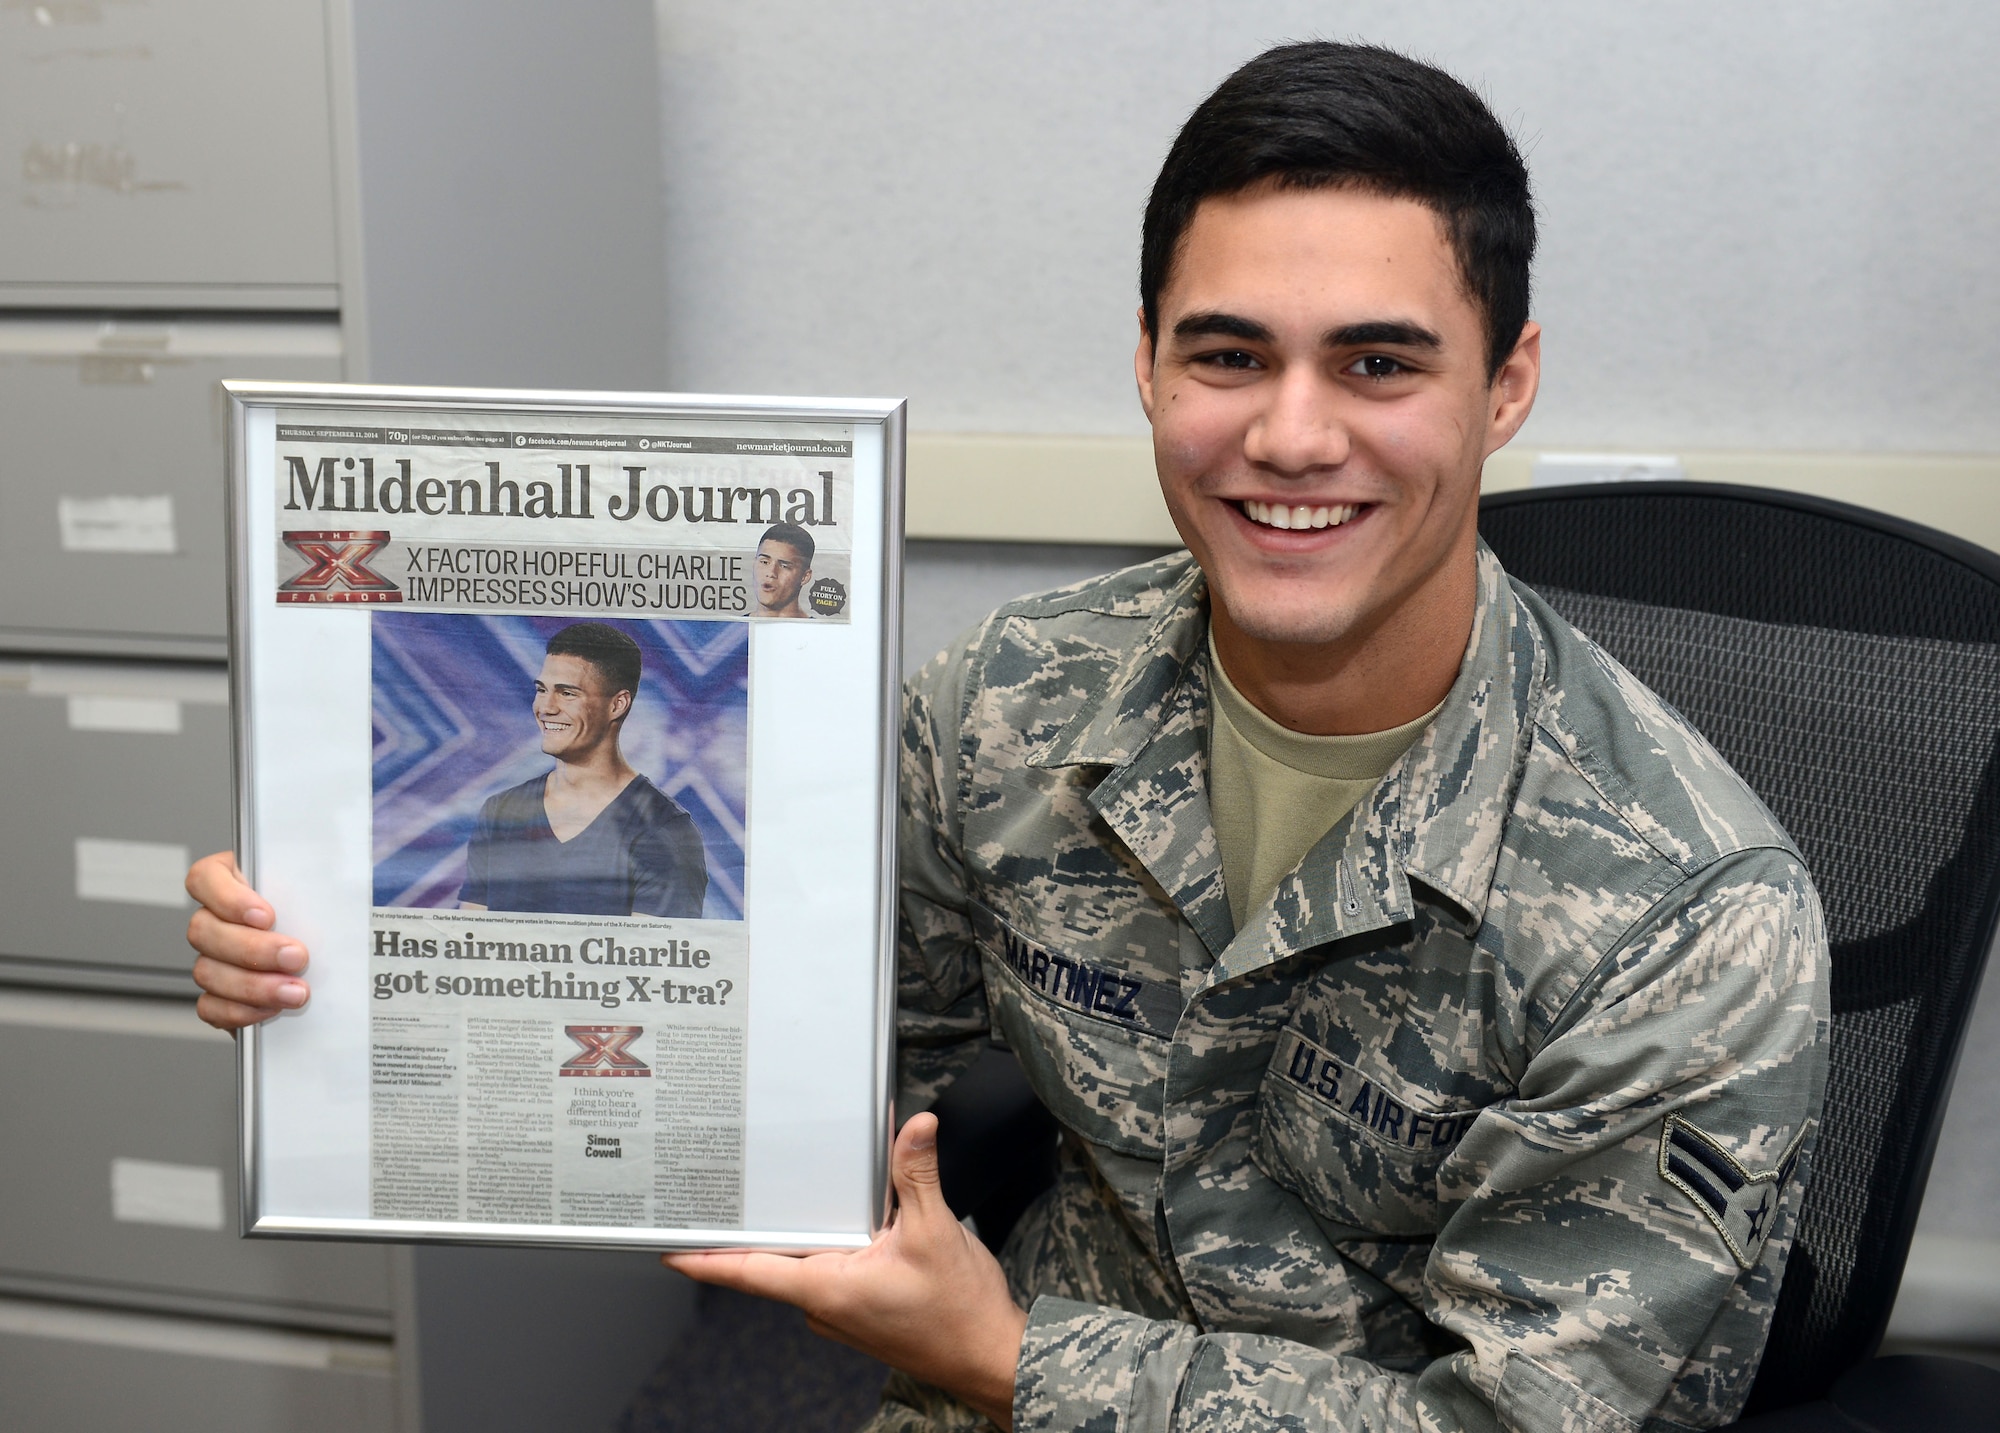 Airman 1st Class Charlie Martinez, 100th Force Support Squadron force management apprentice from Orlando, Fla., poses for a photograph with a newspaper clipping of himself Oct. 15, 2014, on RAF Mildenhall, England. The clipping was from Martinez’s time on X Factor United Kingdom, a televised British singing competition. (U.S. Air Force photo/Senior Airman Kate Maurer)